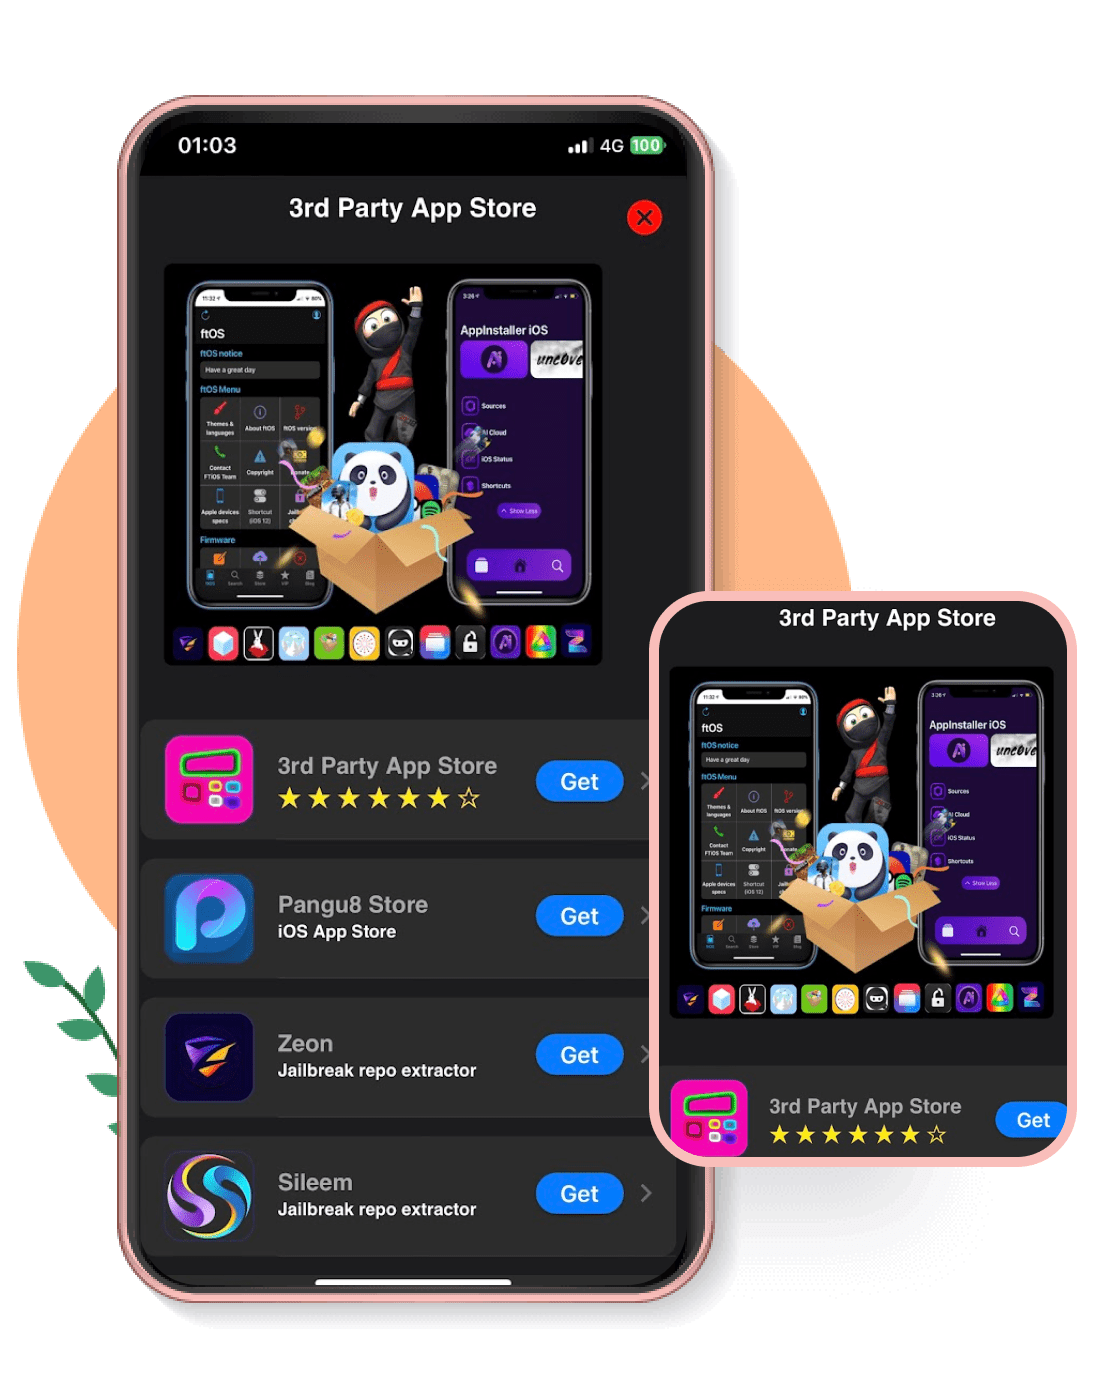 3rd Party App Store